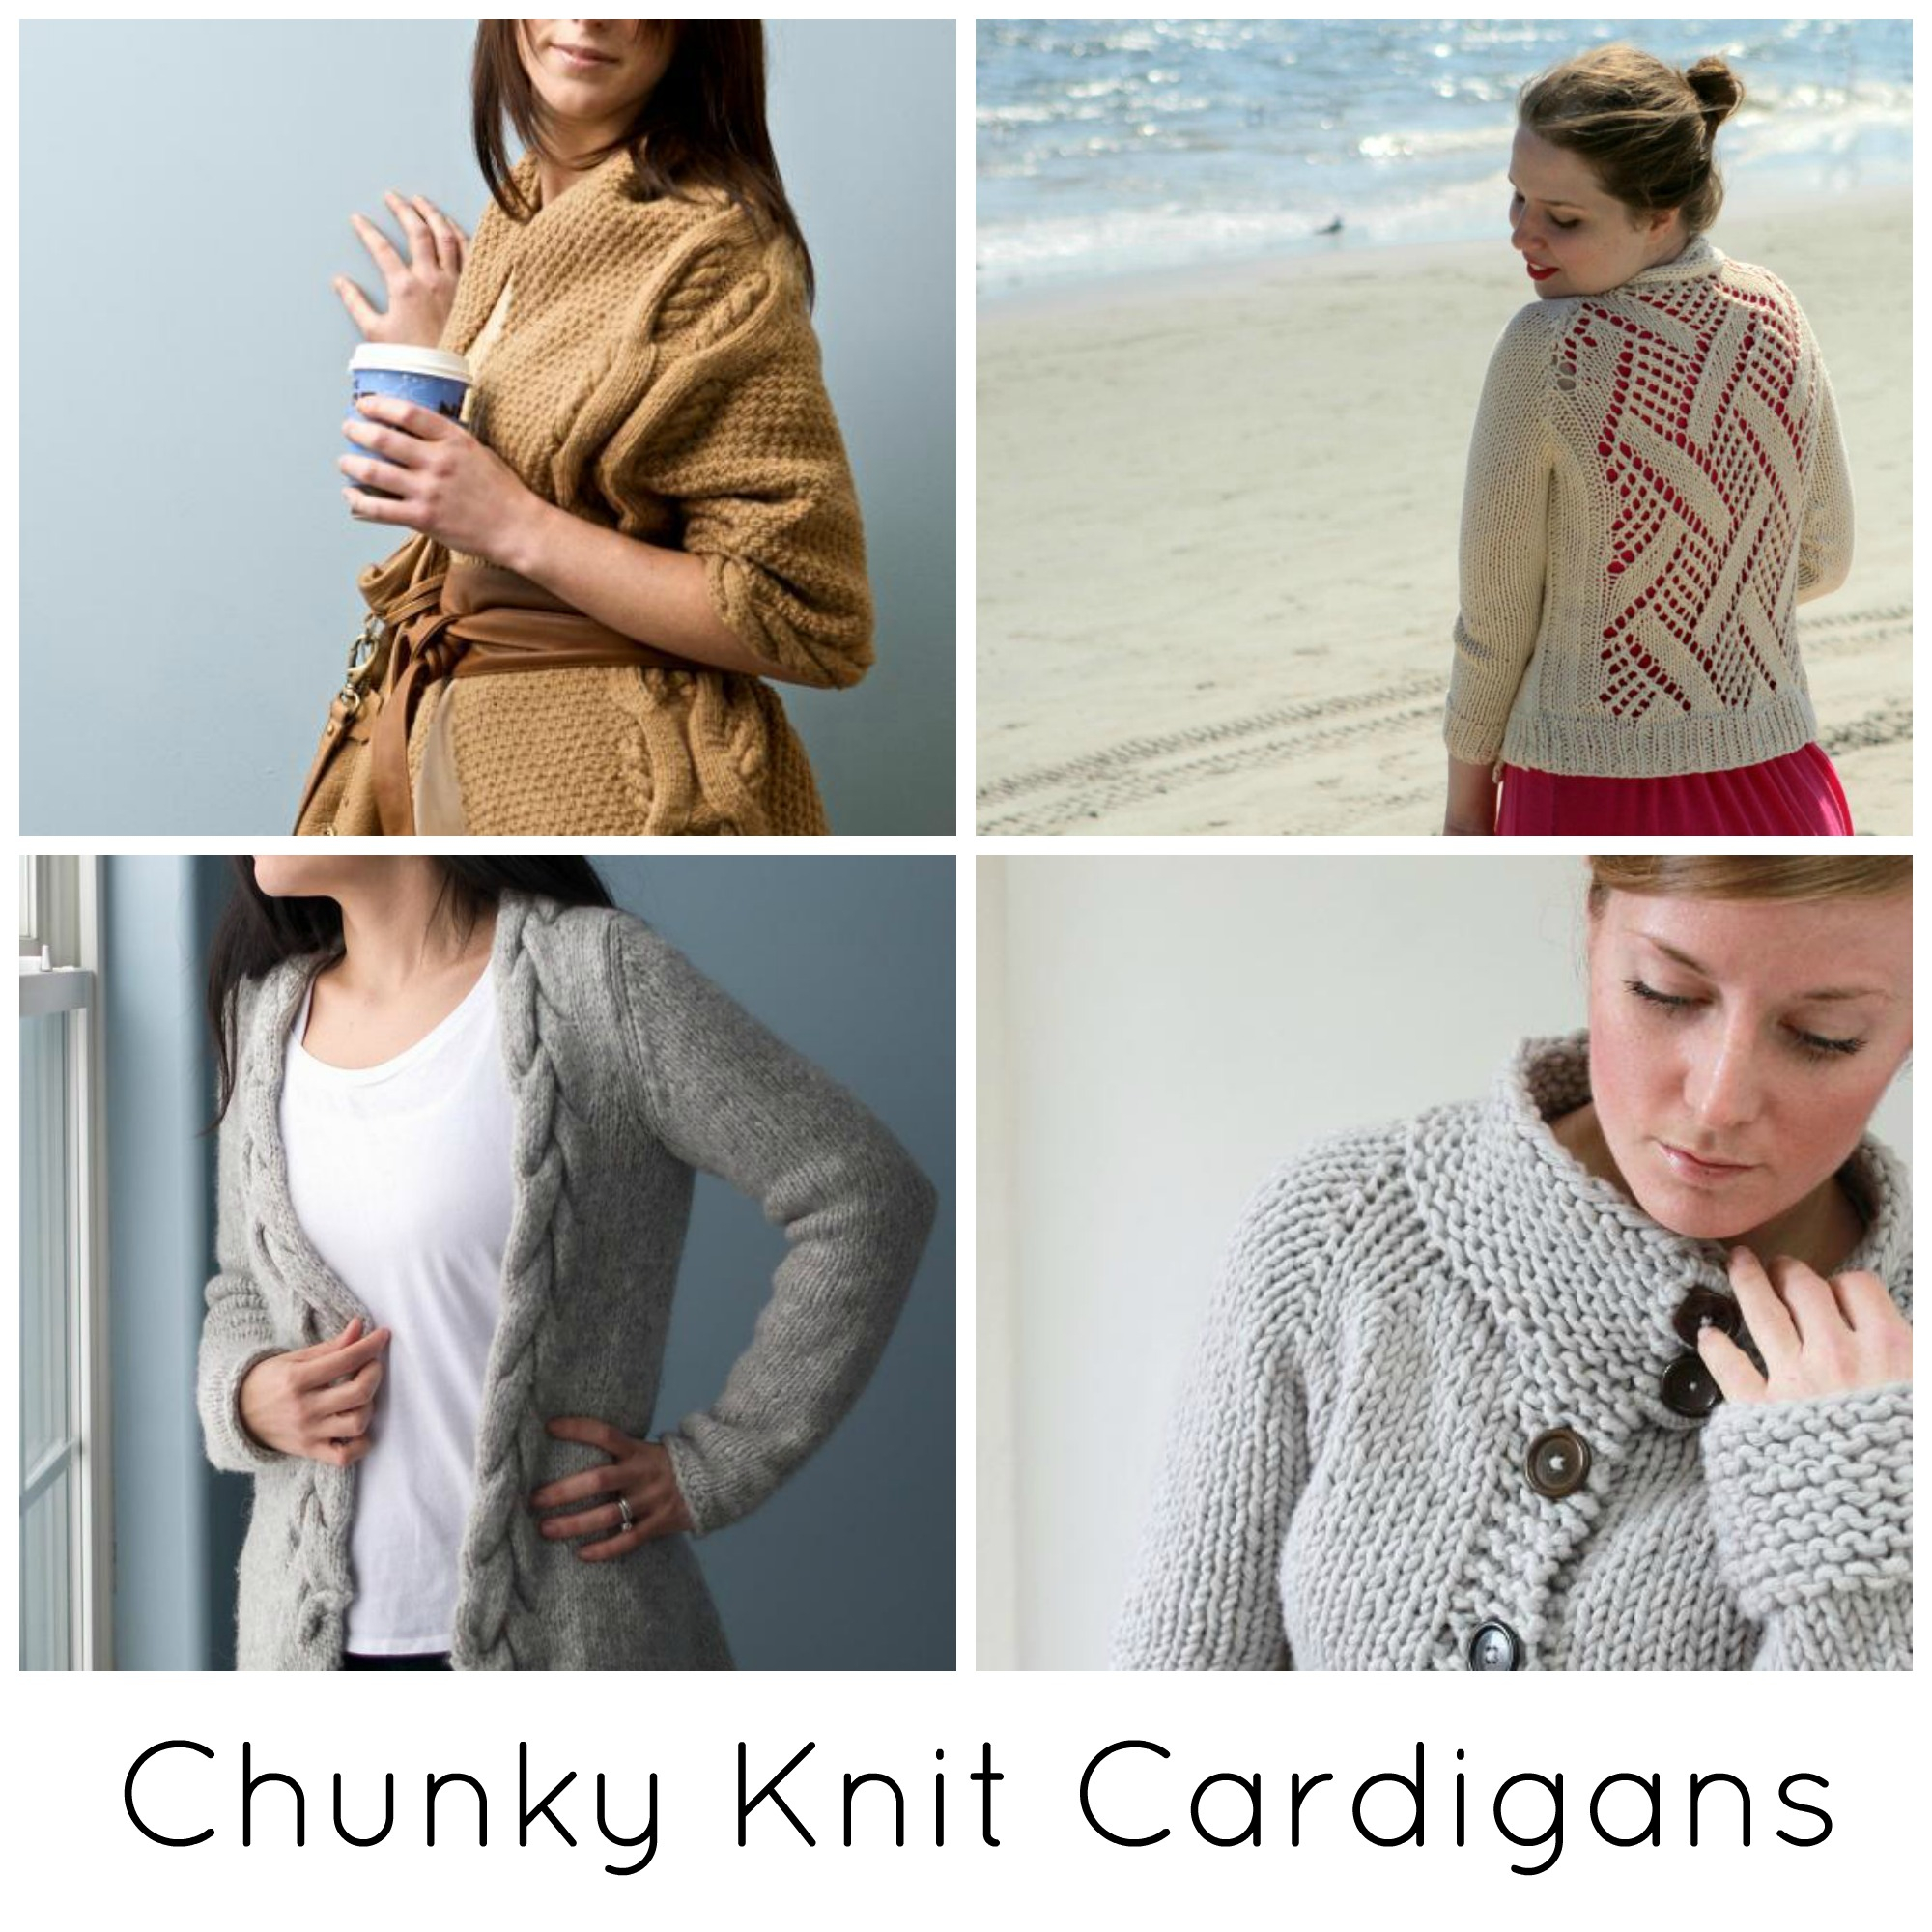 Knit Jumper Pattern The Coziest Chunky Knit Cardigan Patterns Ever